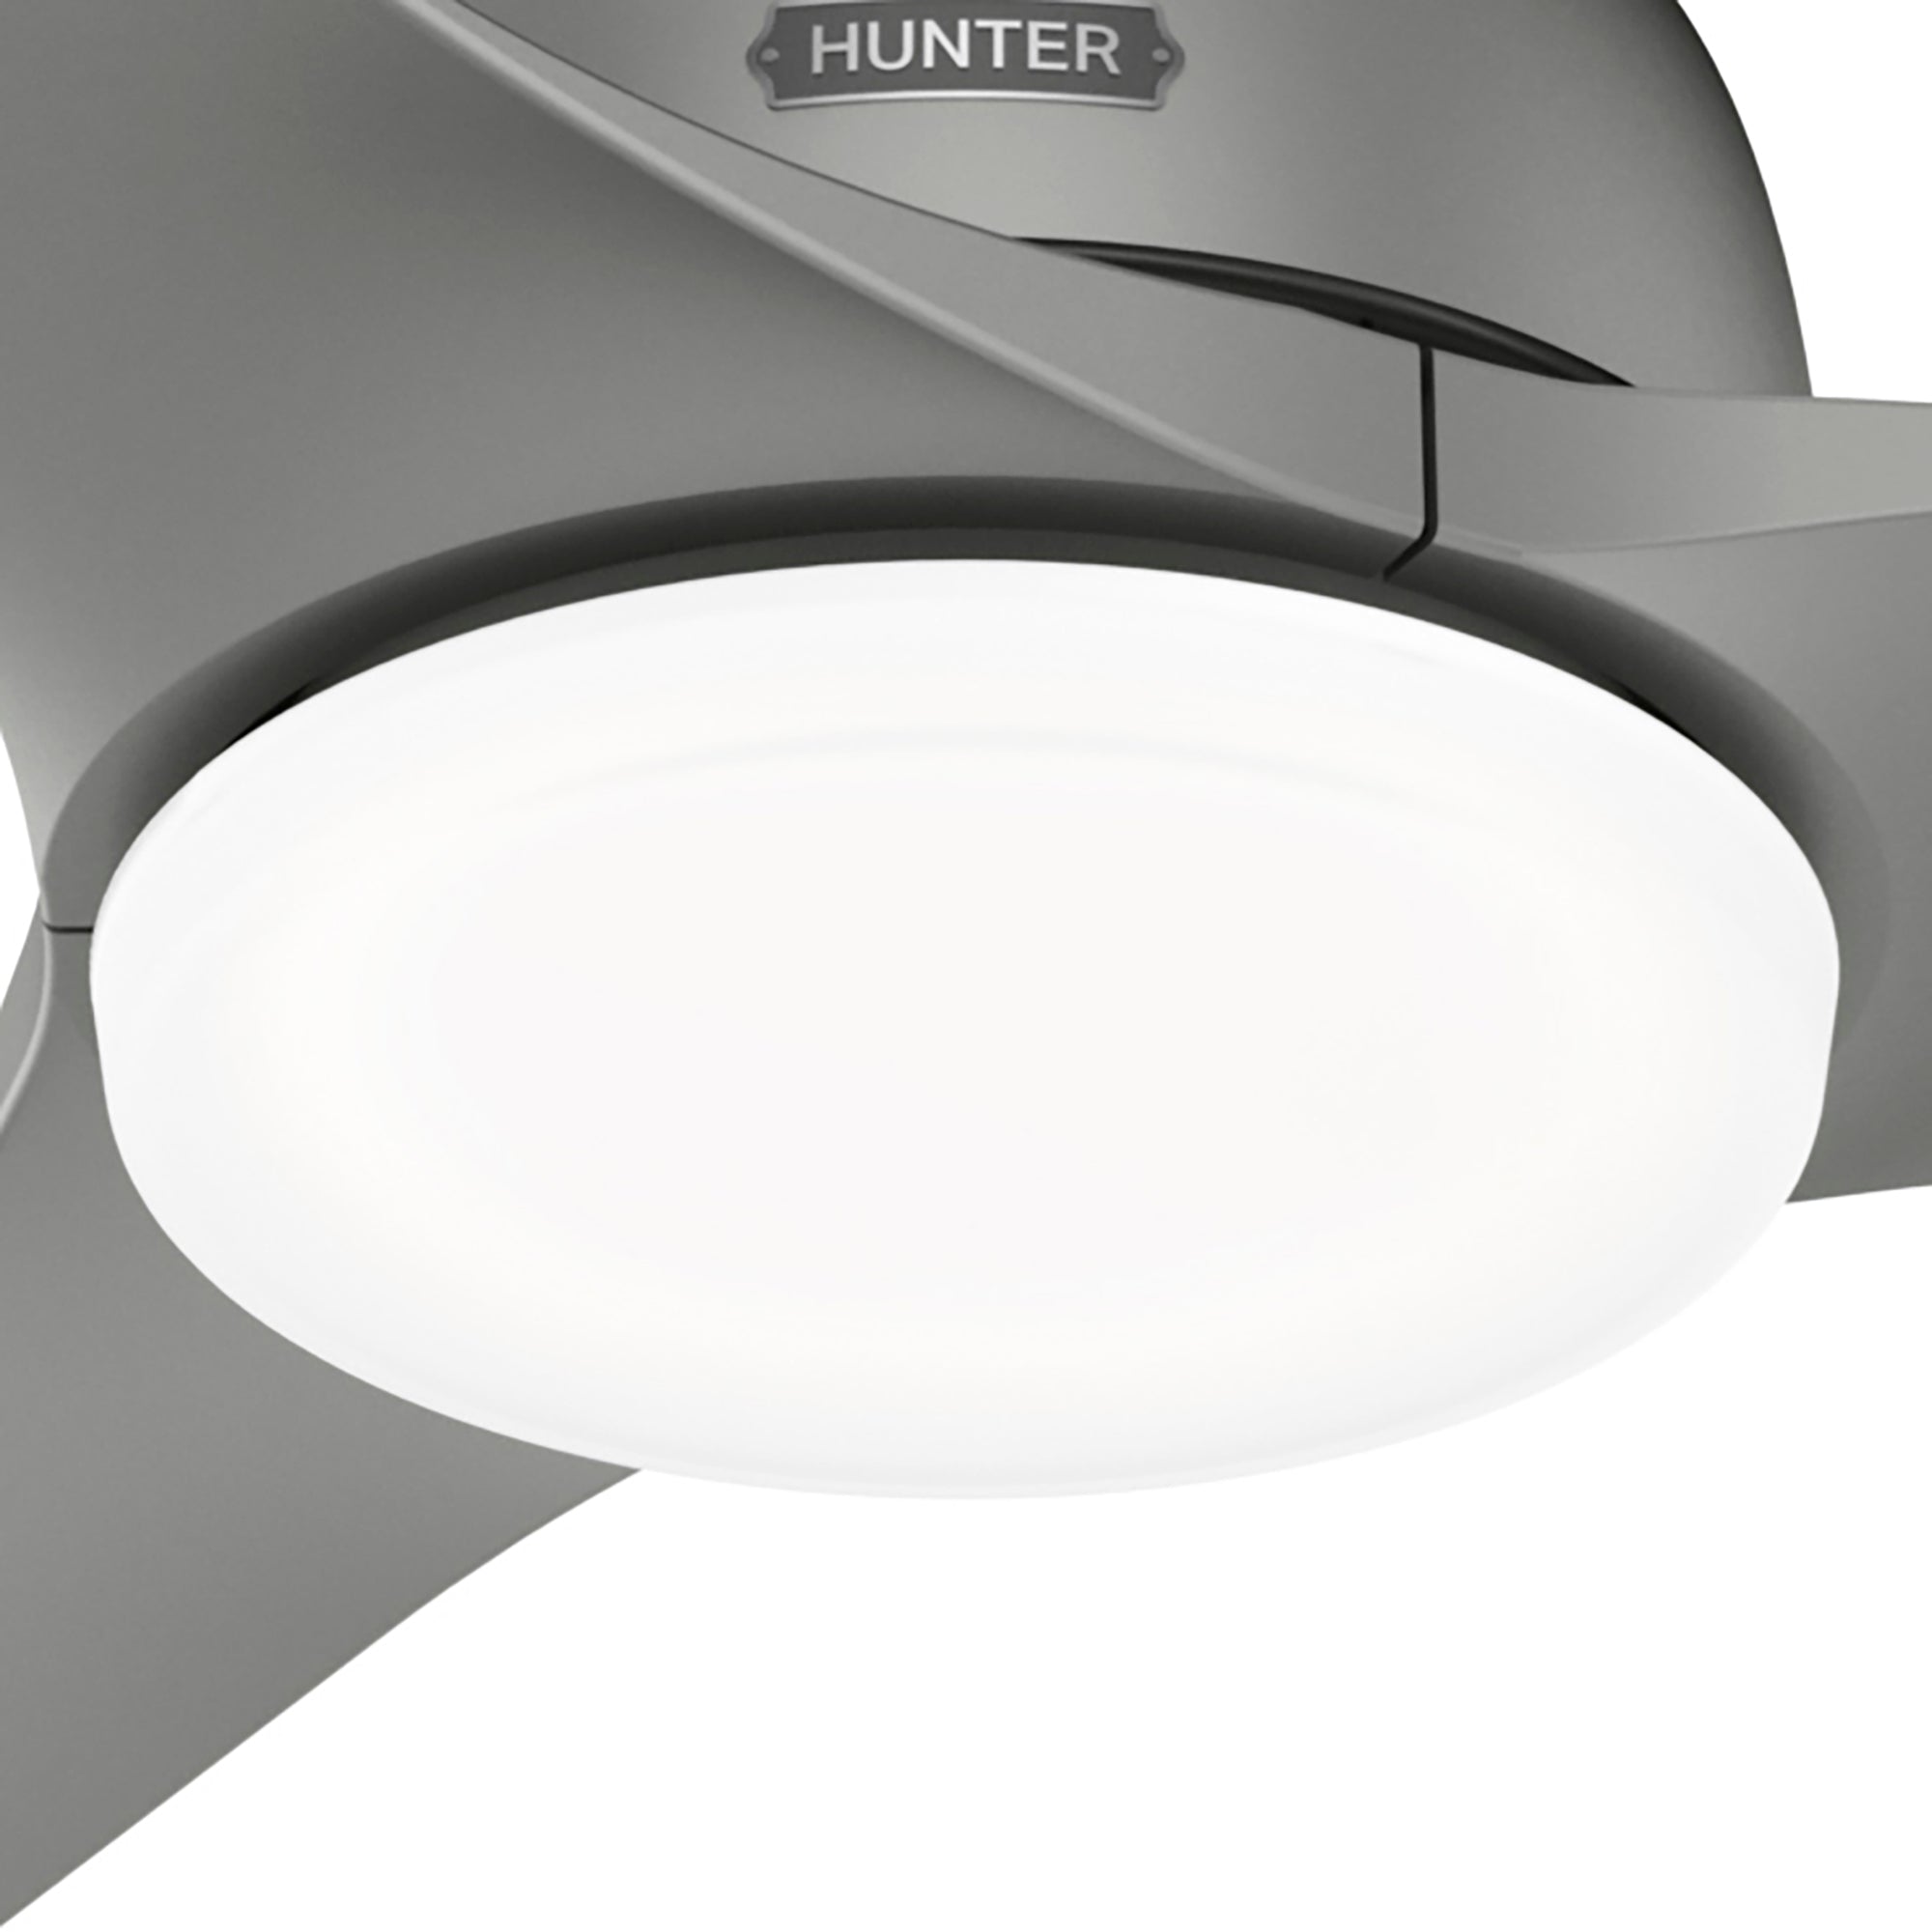 Hunter 52 inch Gallegos Damp Rated Ceiling Fan and Wall Control Ceiling Fan Hunter   